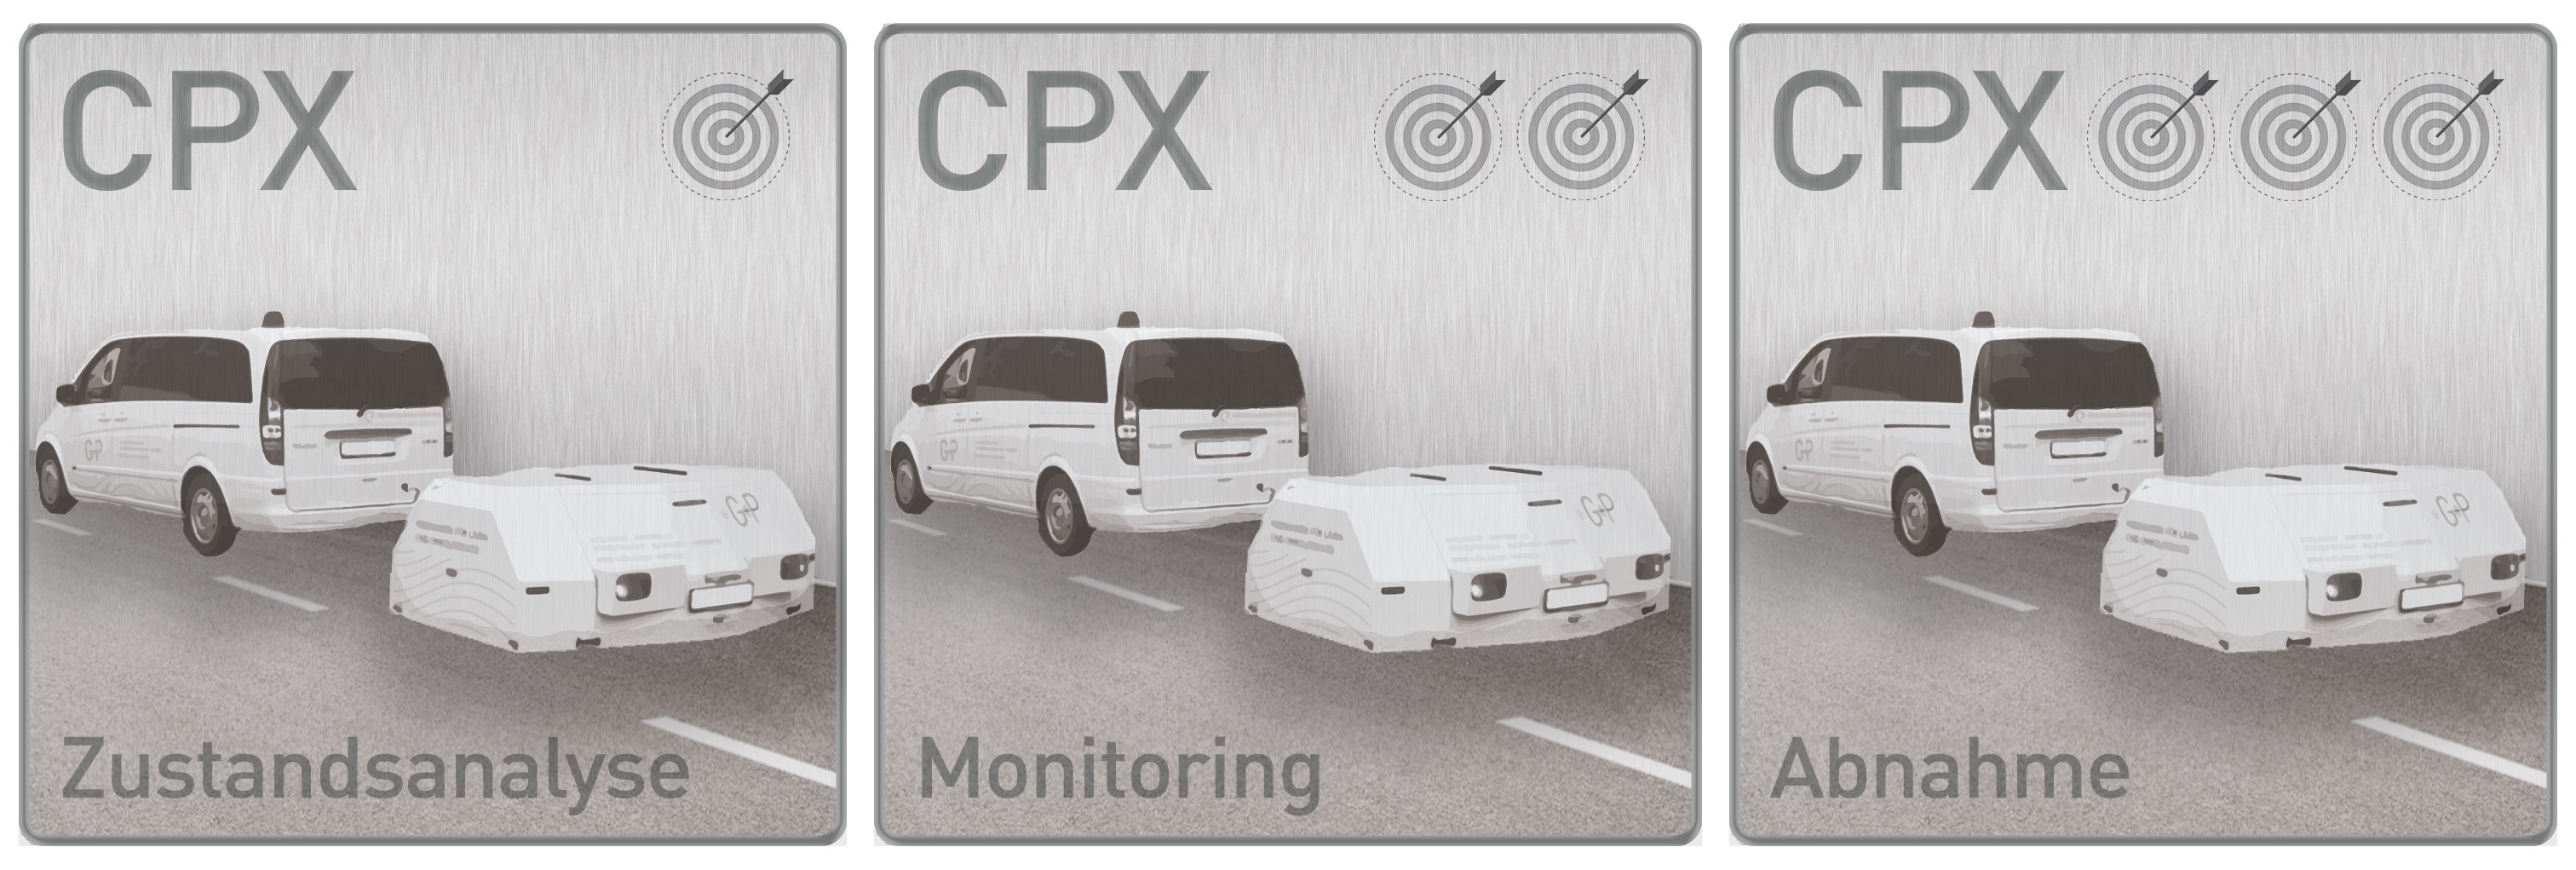 Icons_CPX_Messungen